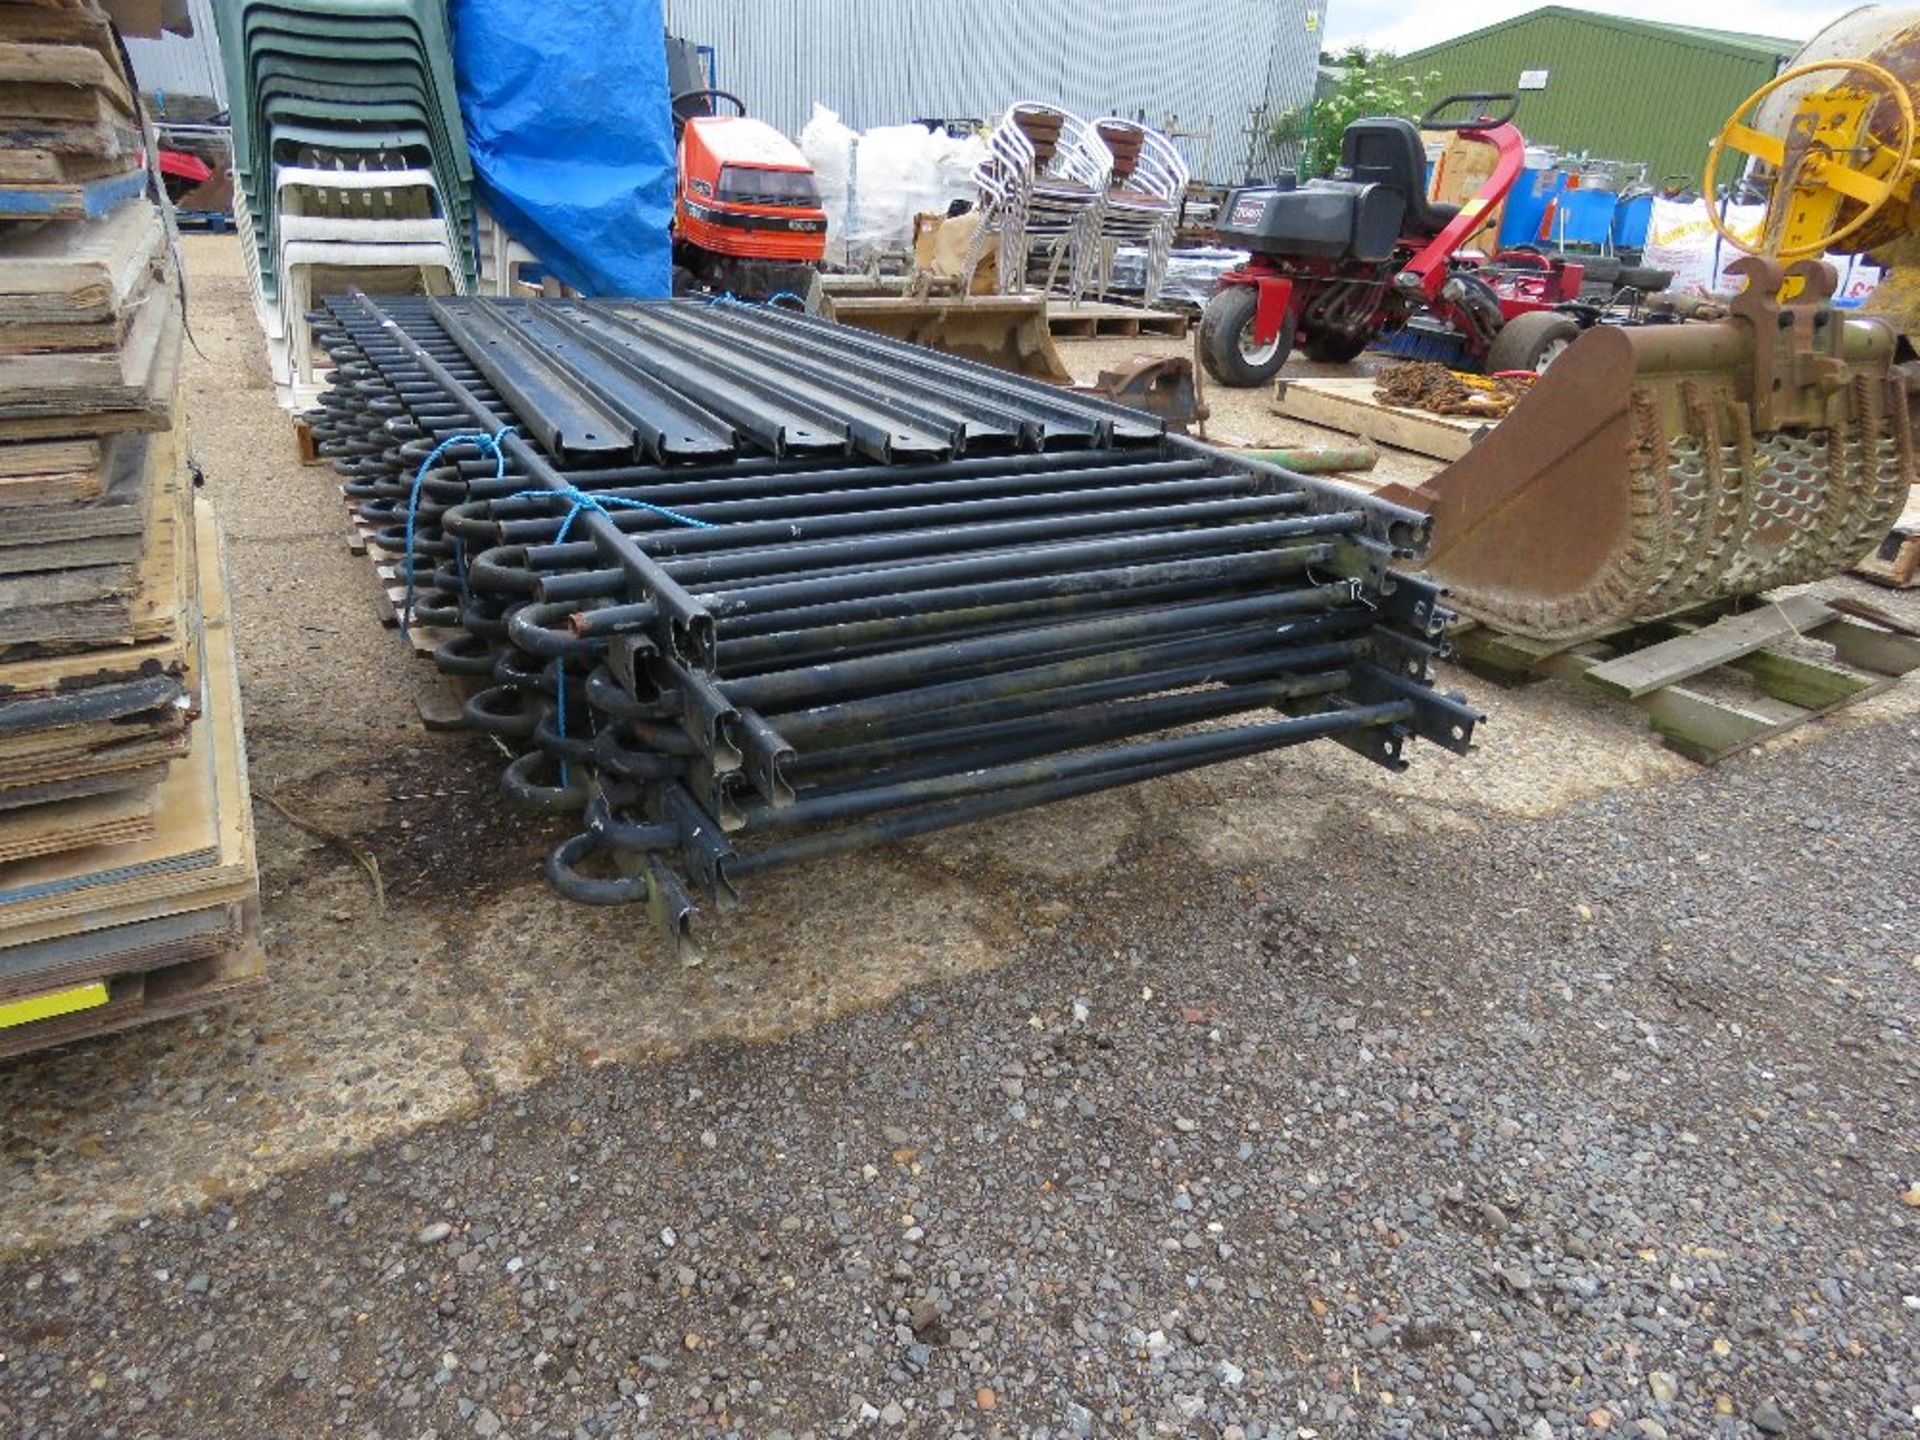 STACK OF 7 X ROUND TOPPED HEAVY DUTY METAL FENCE RAILINGS 2.88M LENGTH X 1.1M HEIGHT APPROX WITH 7 X - Image 4 of 7